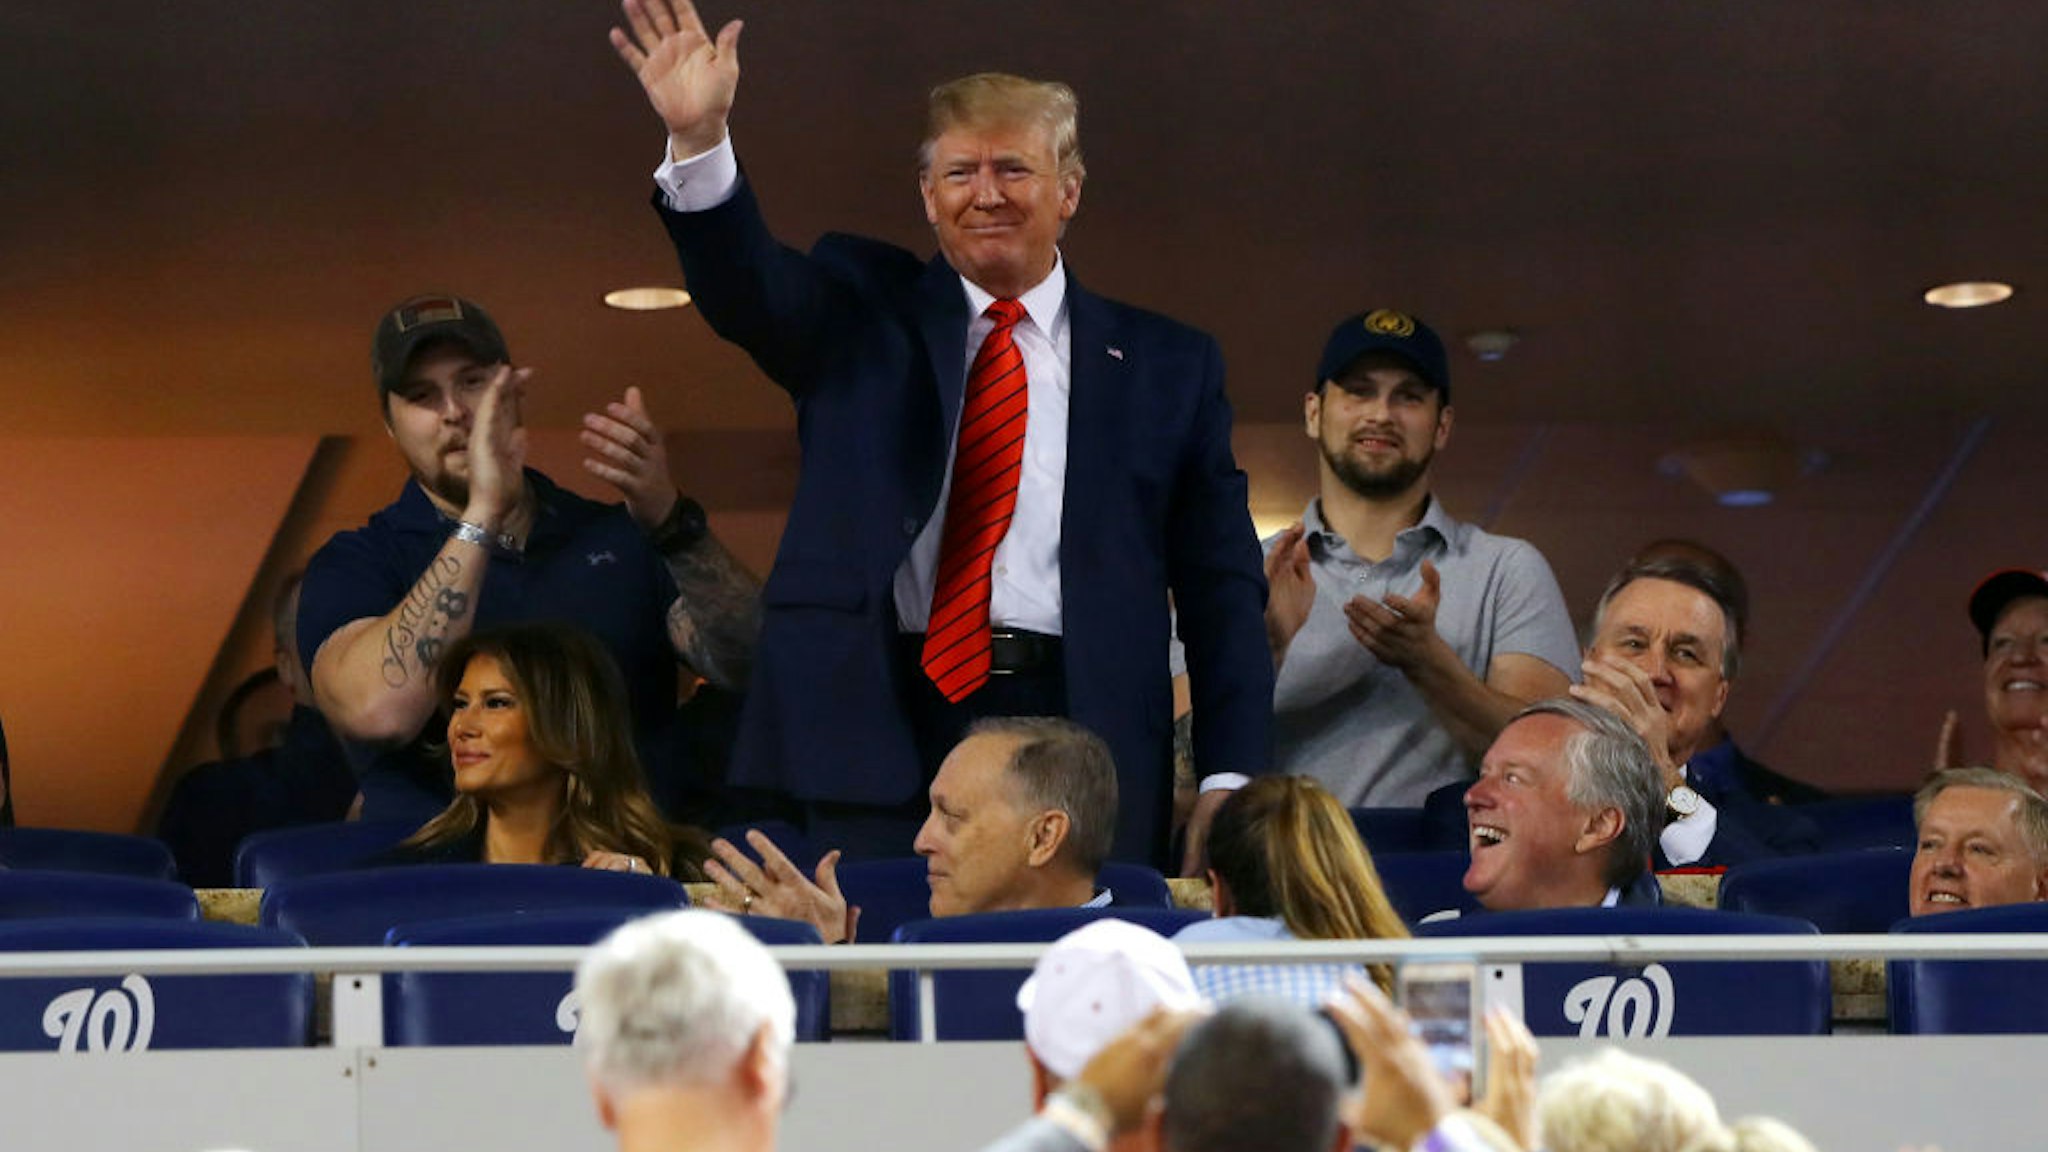 President Donald Trump acknowledges the crowd during Game 5 of the 2019 World Series